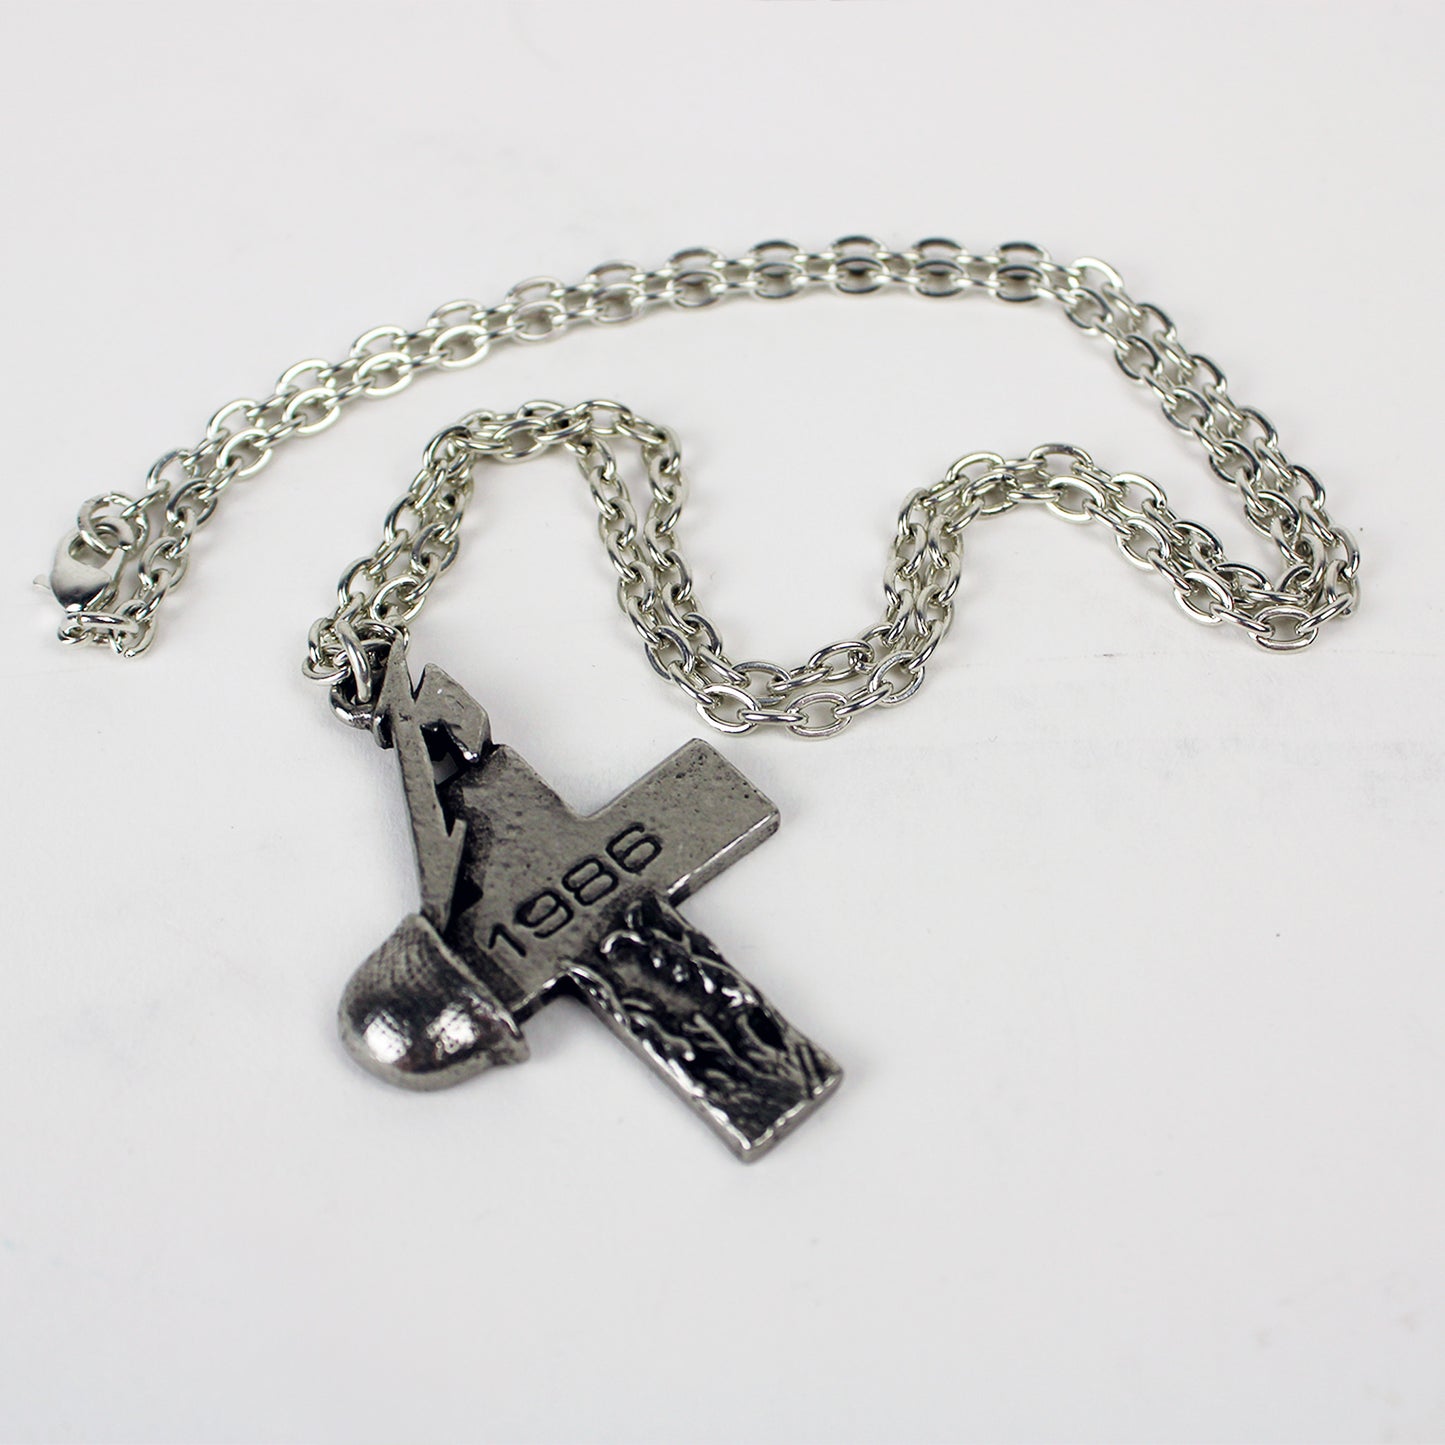 Metallica Master of Puppets 1986 Cross Necklace